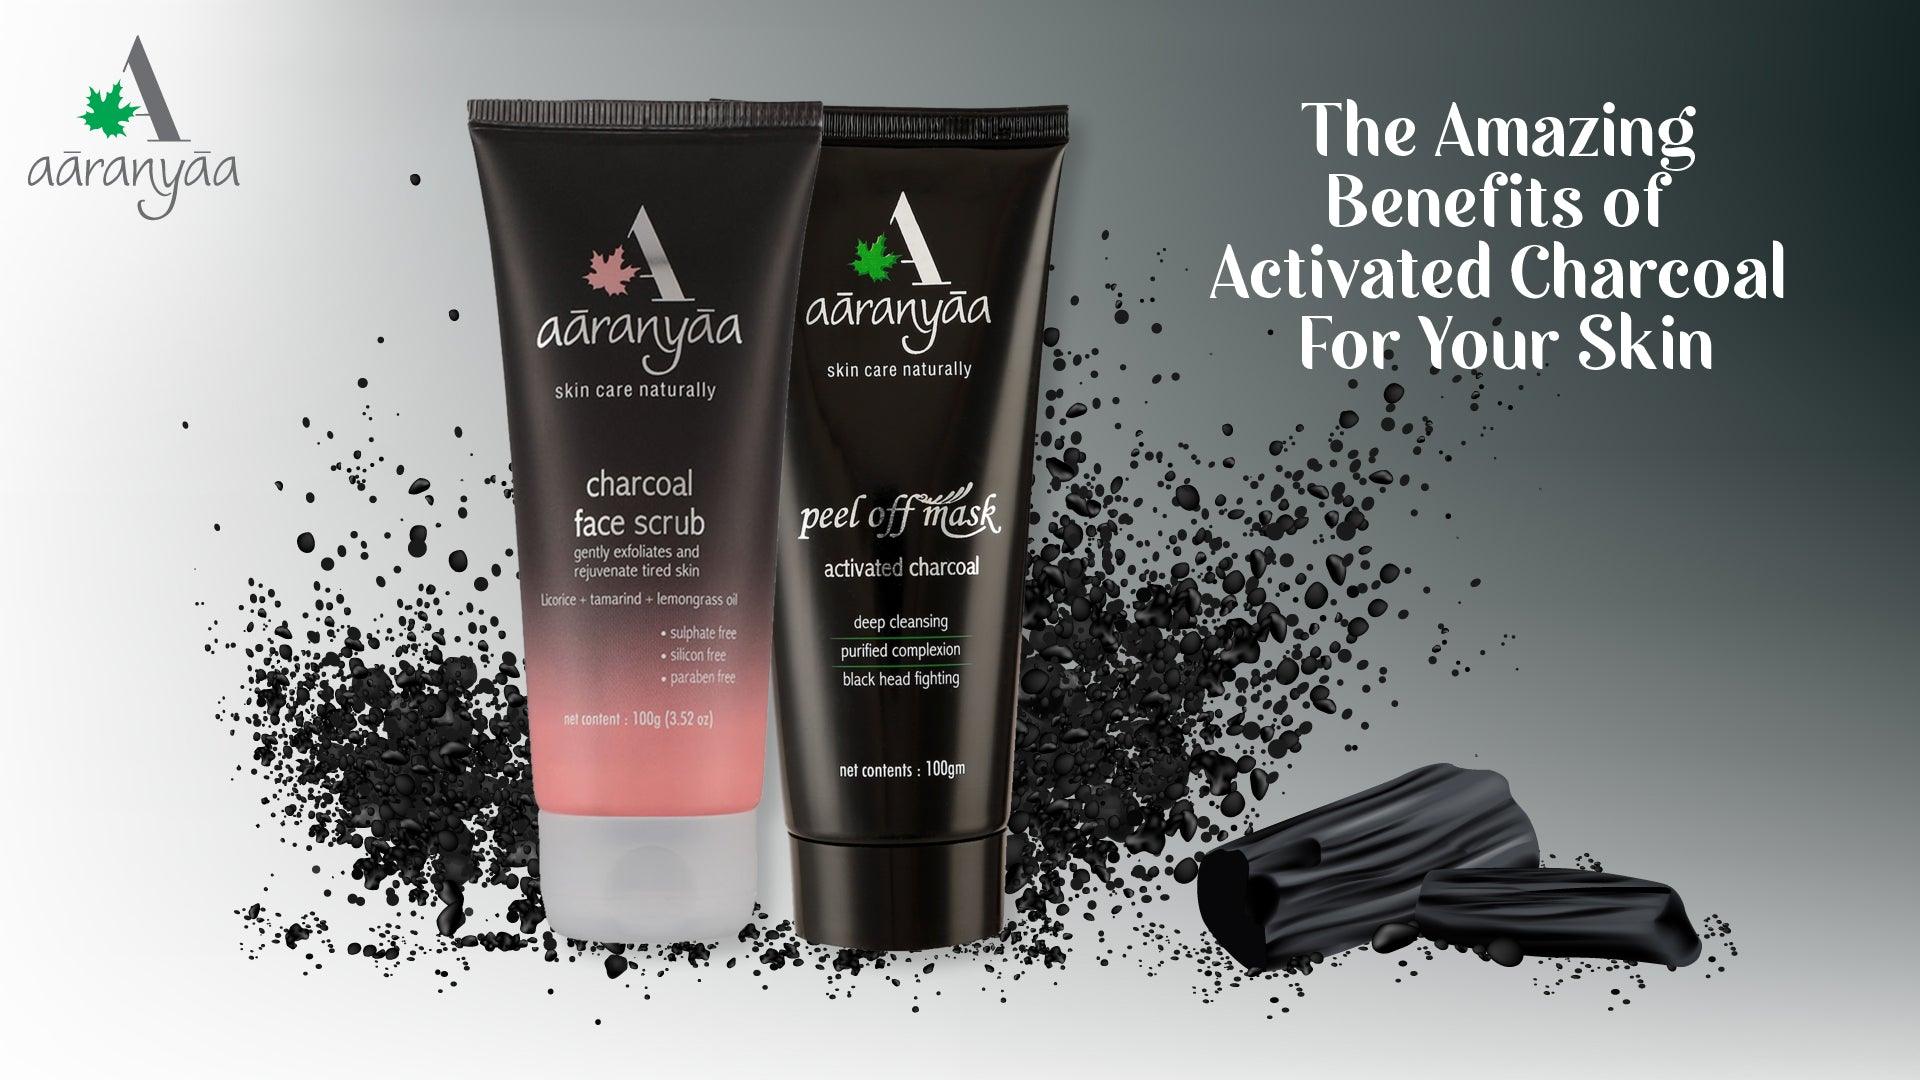 The Amazing Benefits of Activated Charcoal For Your Skin - aaranyaa skincare